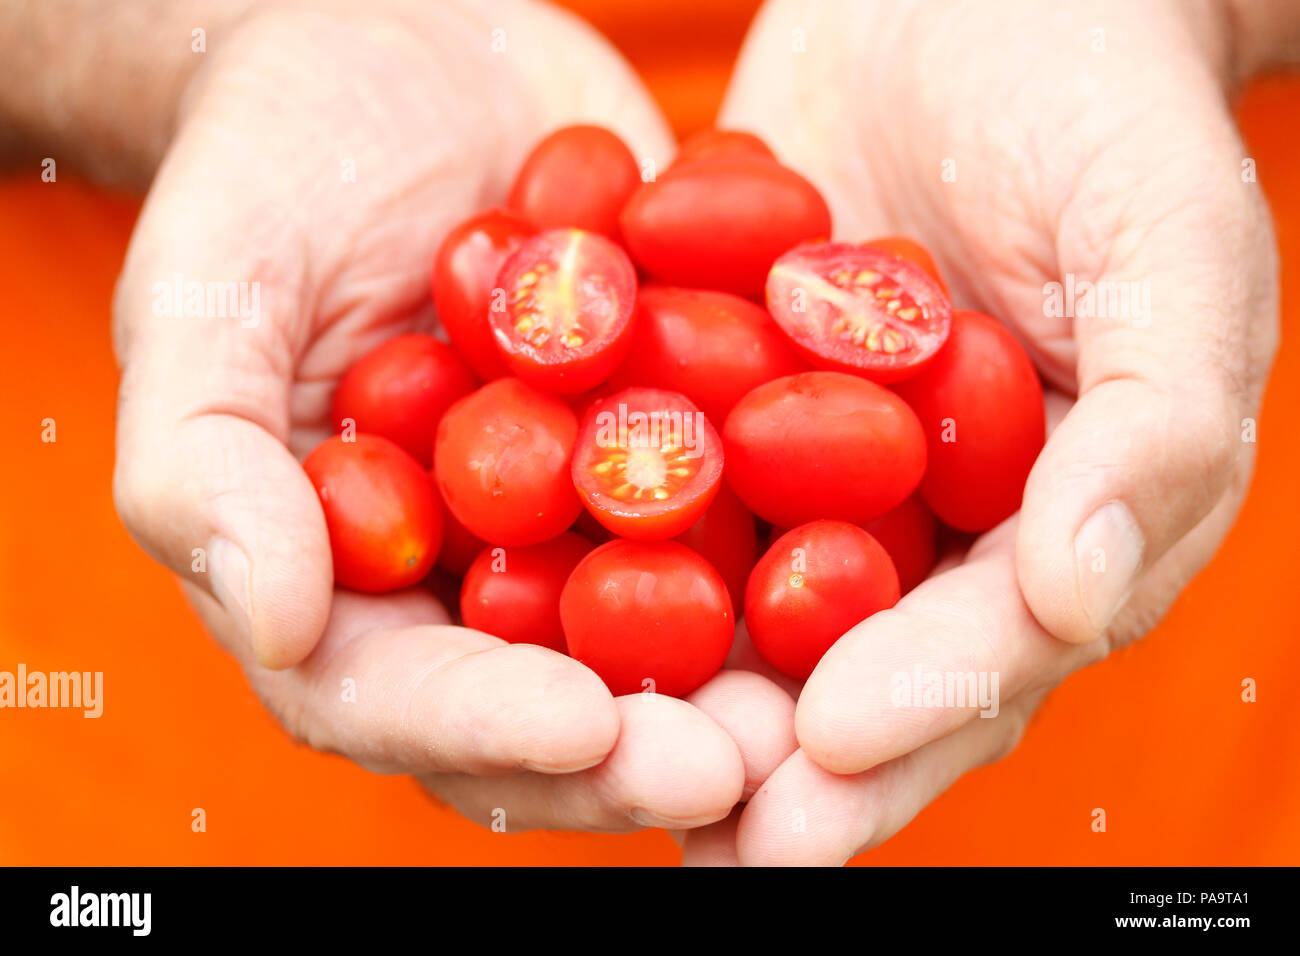 Tomatoes cherry pear drop. Stock Photo